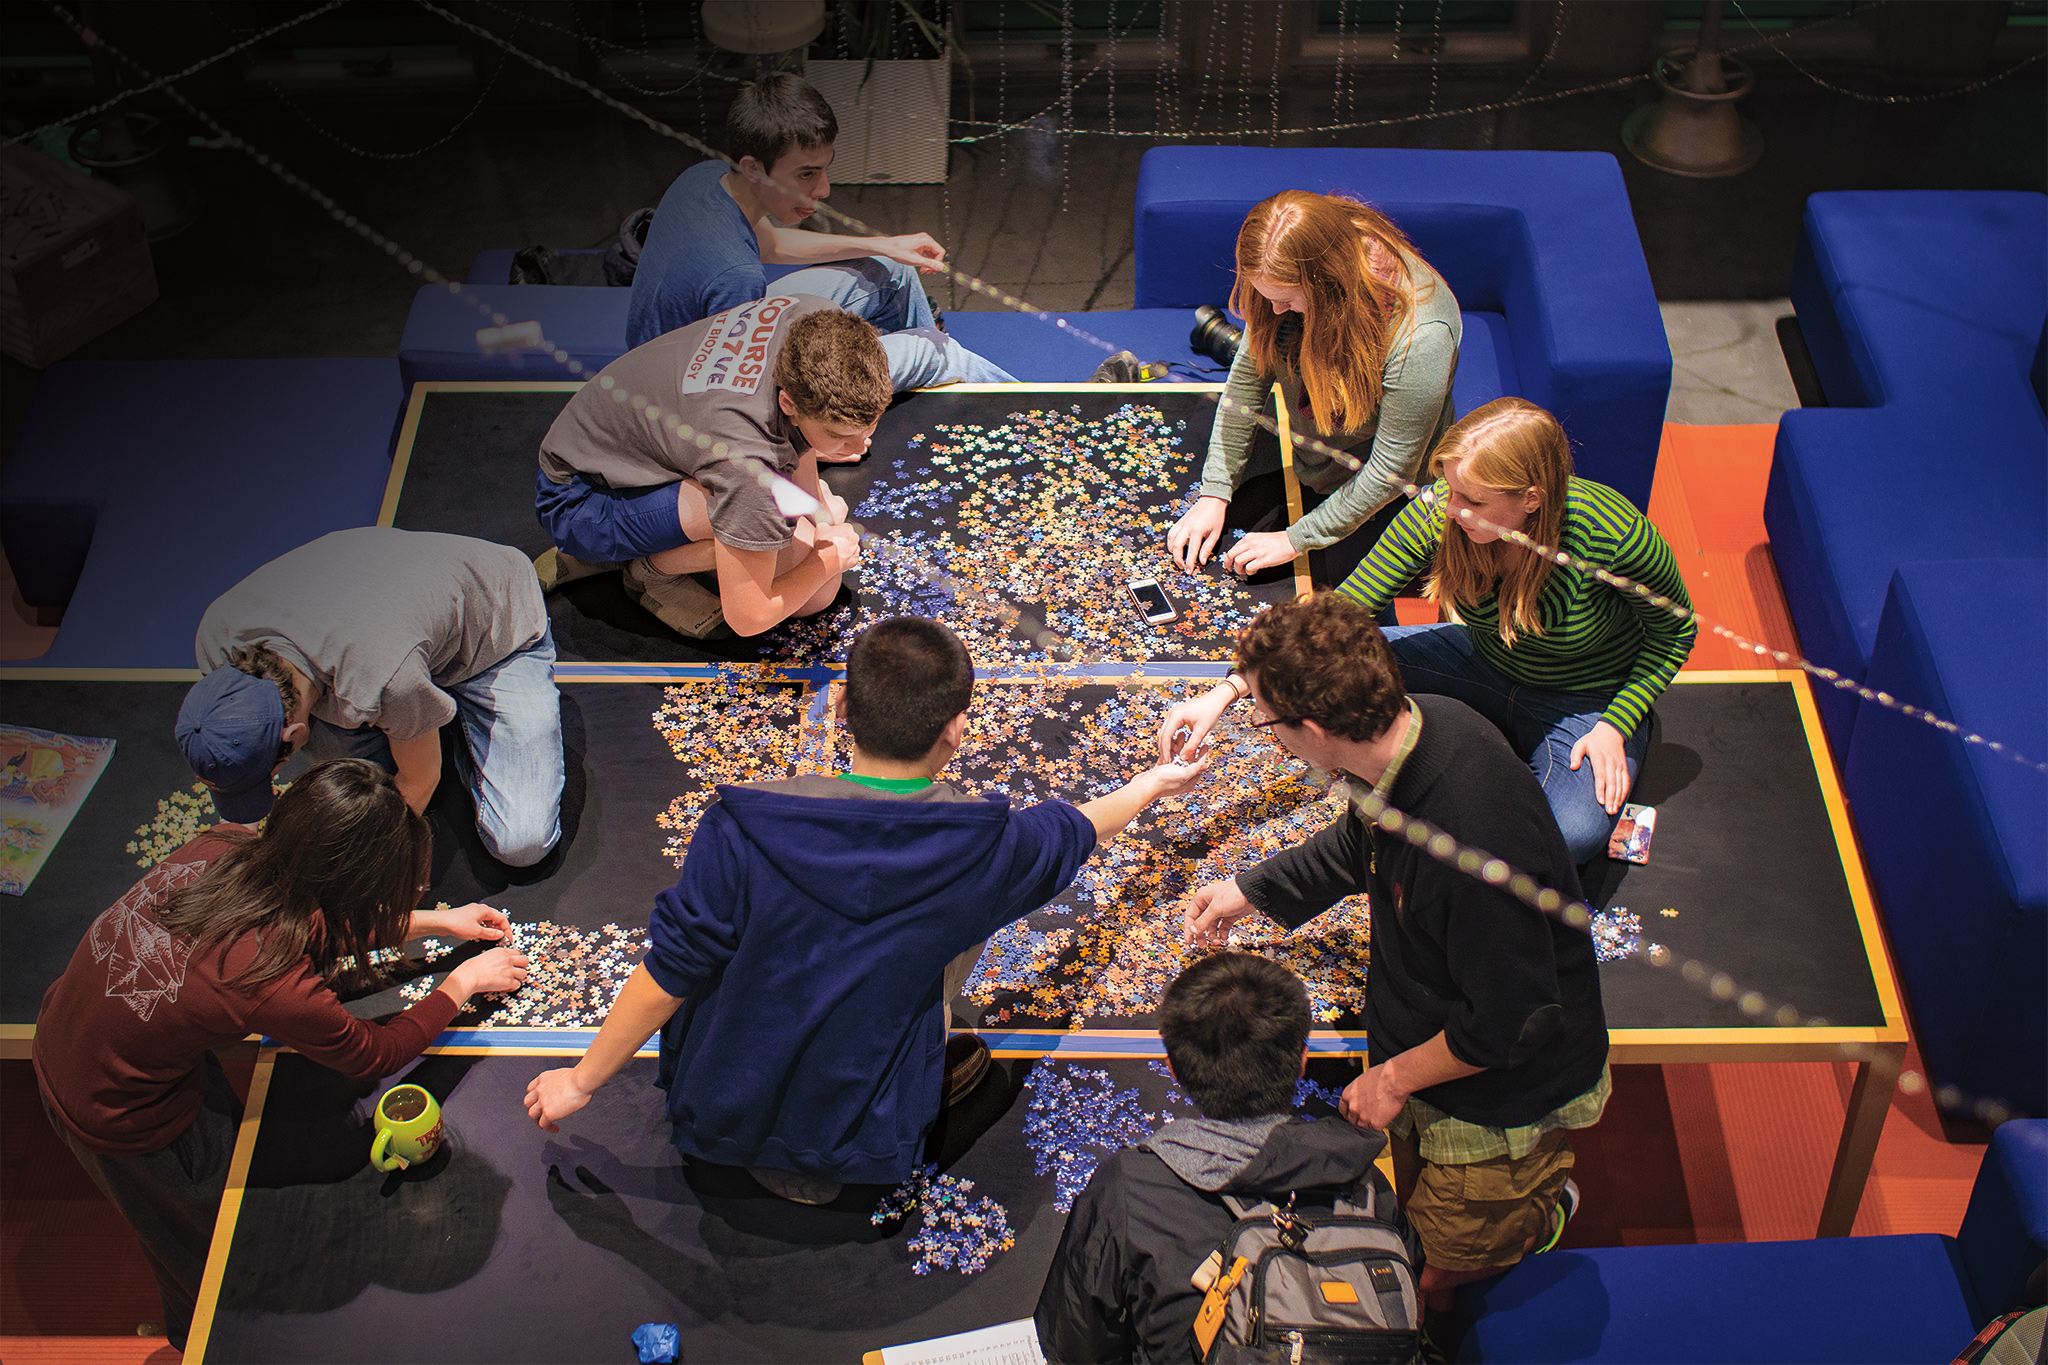 Students at Simmons Hall begin work on a “mega-puzzle” with tens of thousands of pieces, which was collectively assembled in the dorm’s mailbox lounge over the course of three months. Image: Eric Keezer